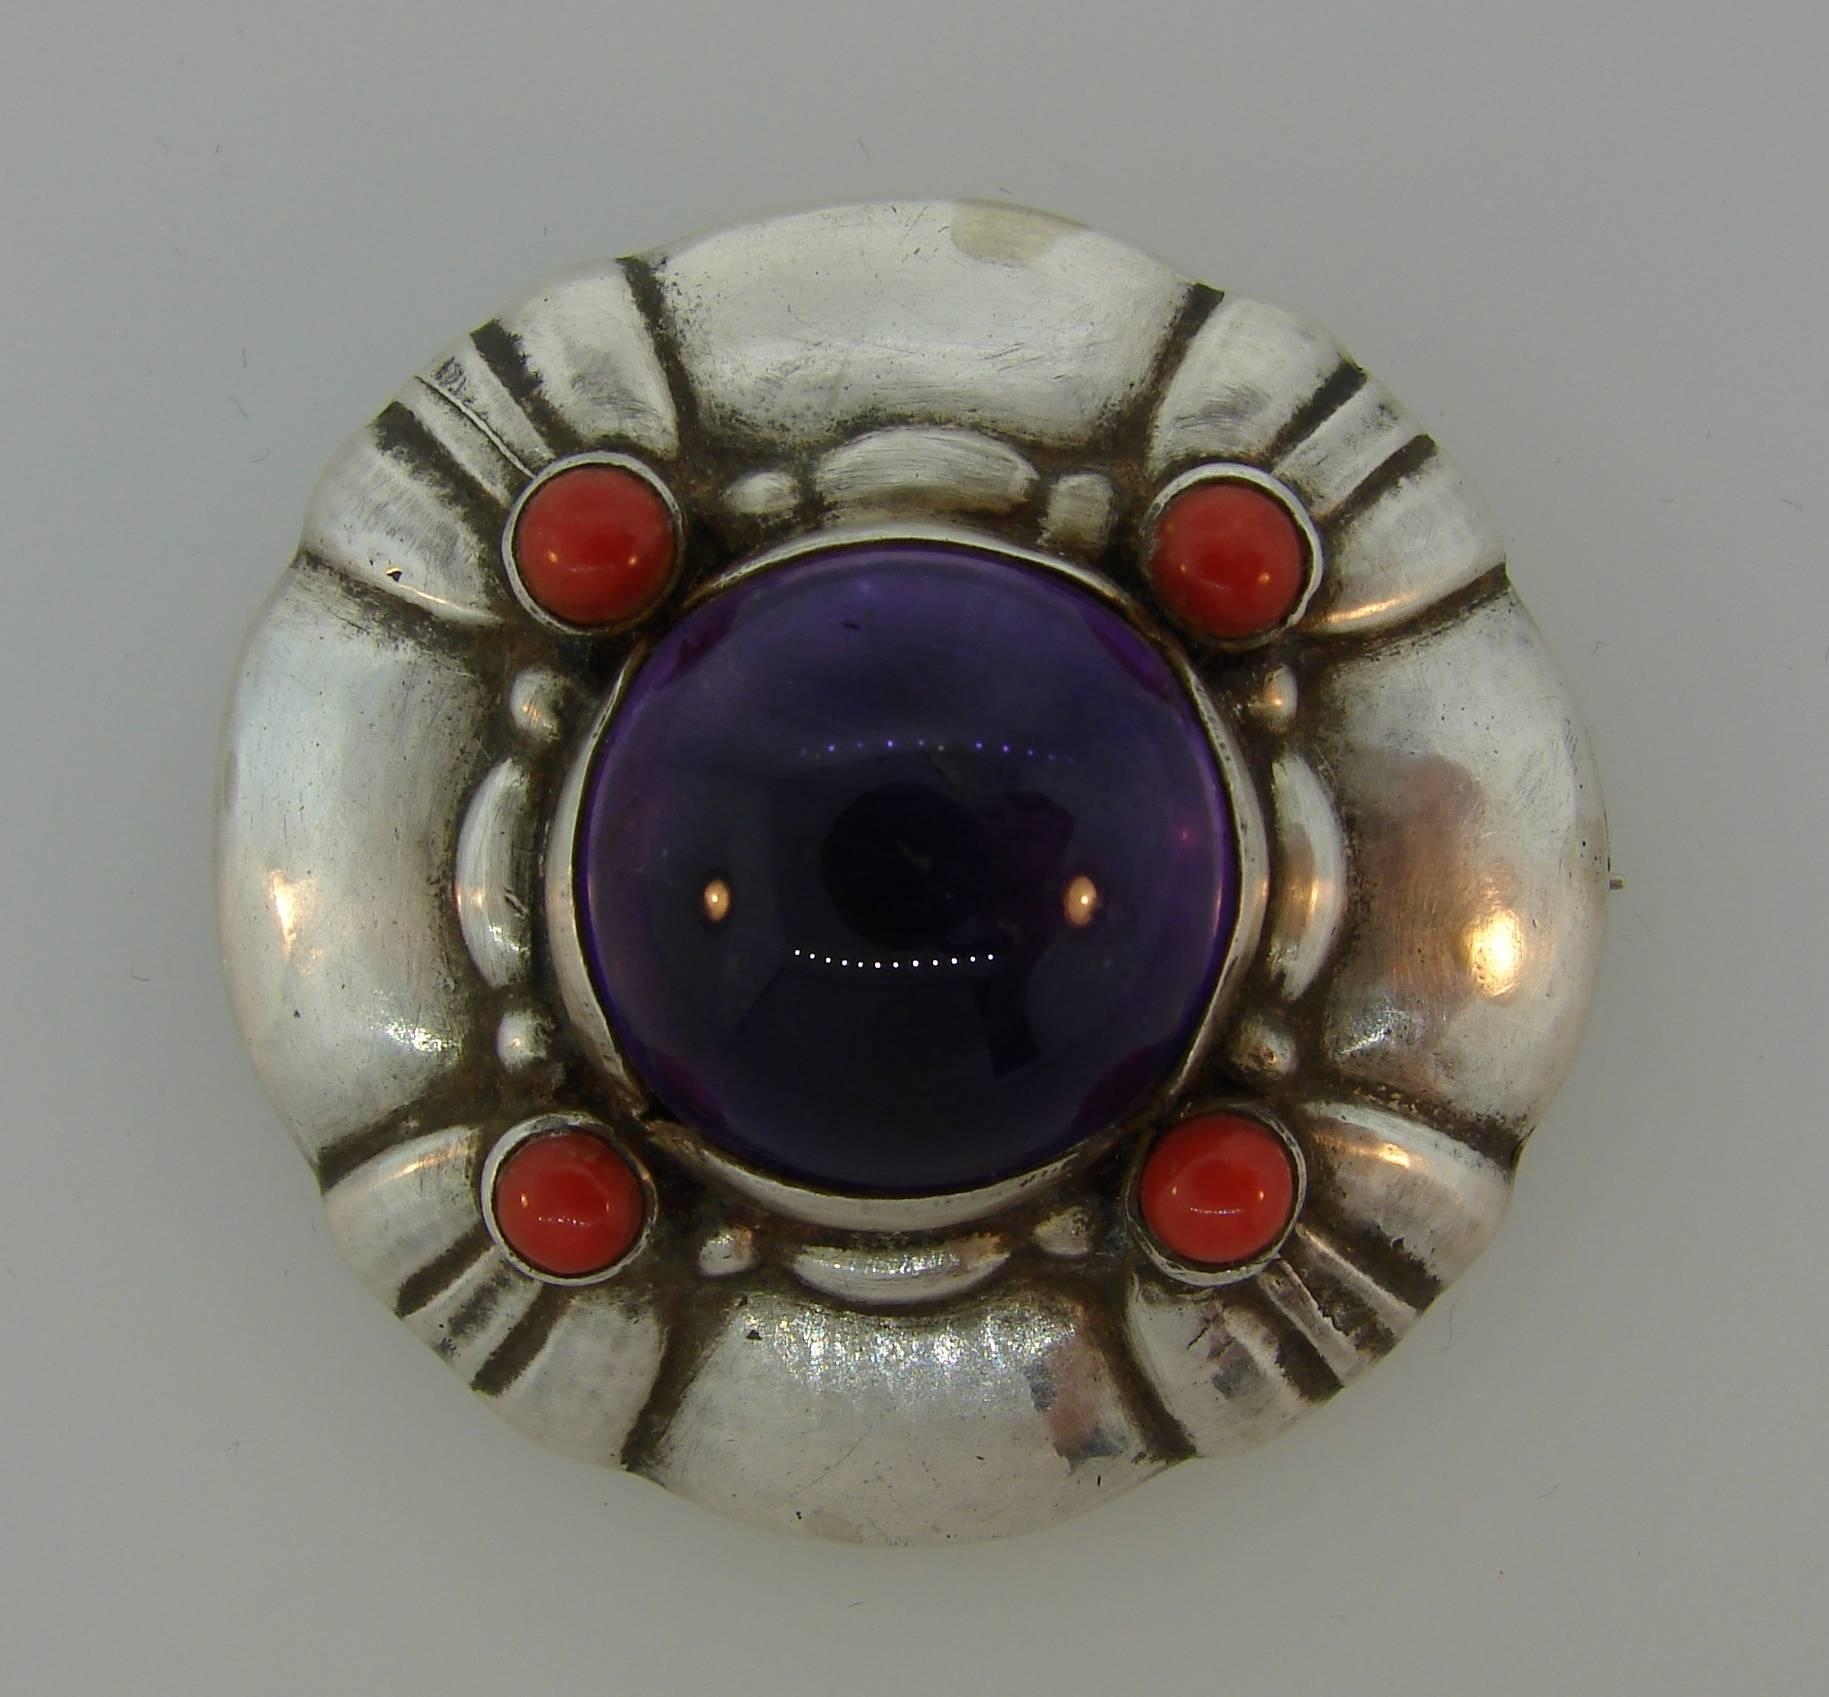 Fabulous pin created by Georg Jensen in the 1940's. Collectable and wearable, the brooch is a great addition to your jewelry collection.
It measures 1.5 inches in diameter and weighs 32.4 grams. 
Stamped with Georg Jensen maker's mark, a silver